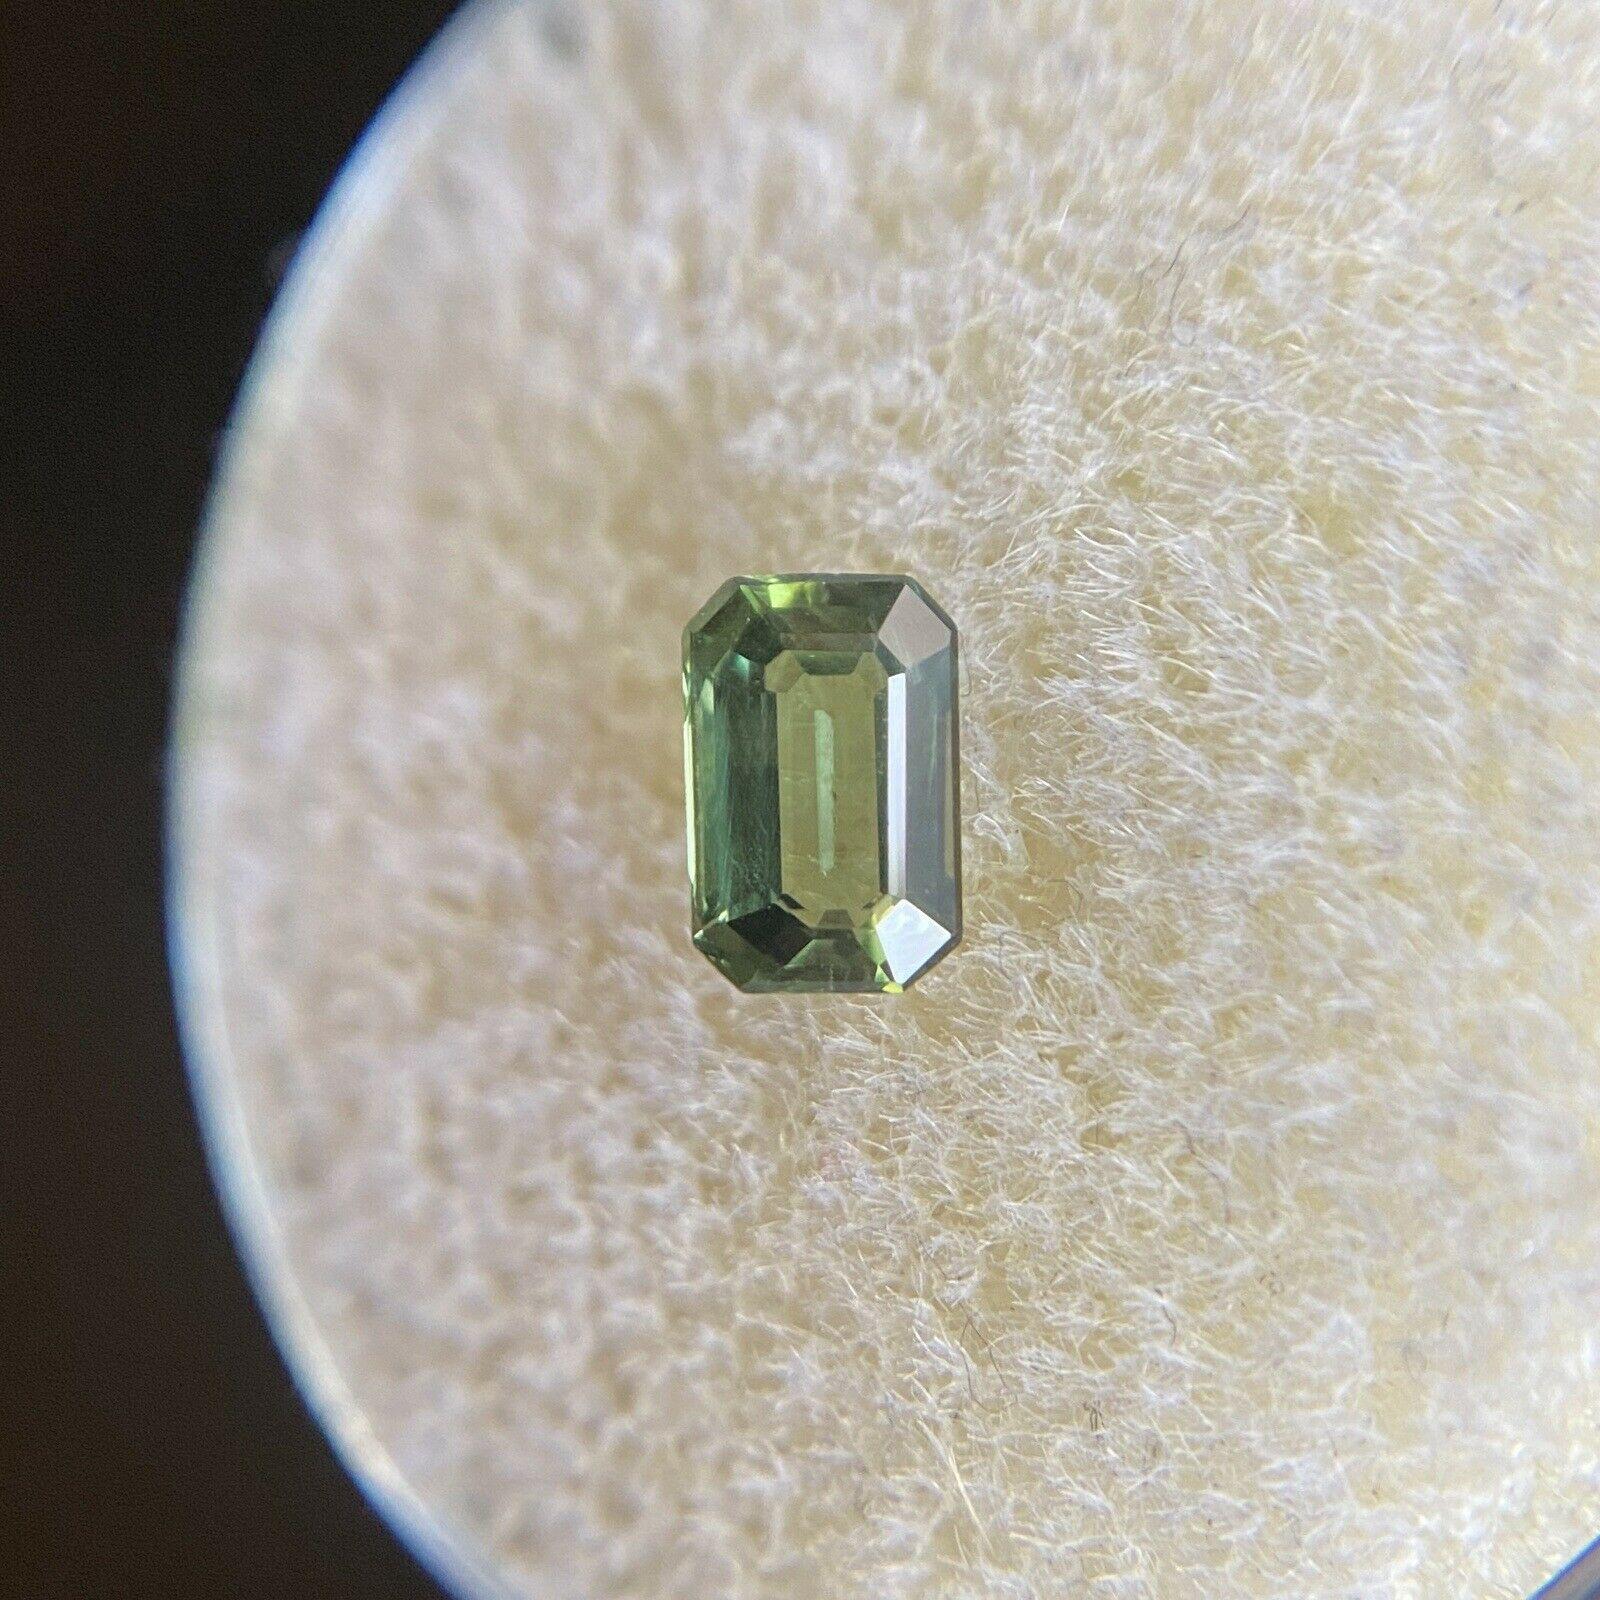 Fine 0.57ct Green Untreated Australian Sapphire Emerald Cut 5.7x3.7mm Loose Gem

Natural Untreated Australian Green Sapphire Gemstone. 
0.57 Carat with a beautiful green colour and an excellent emerald octagon cut. Also has excellent clarity, very